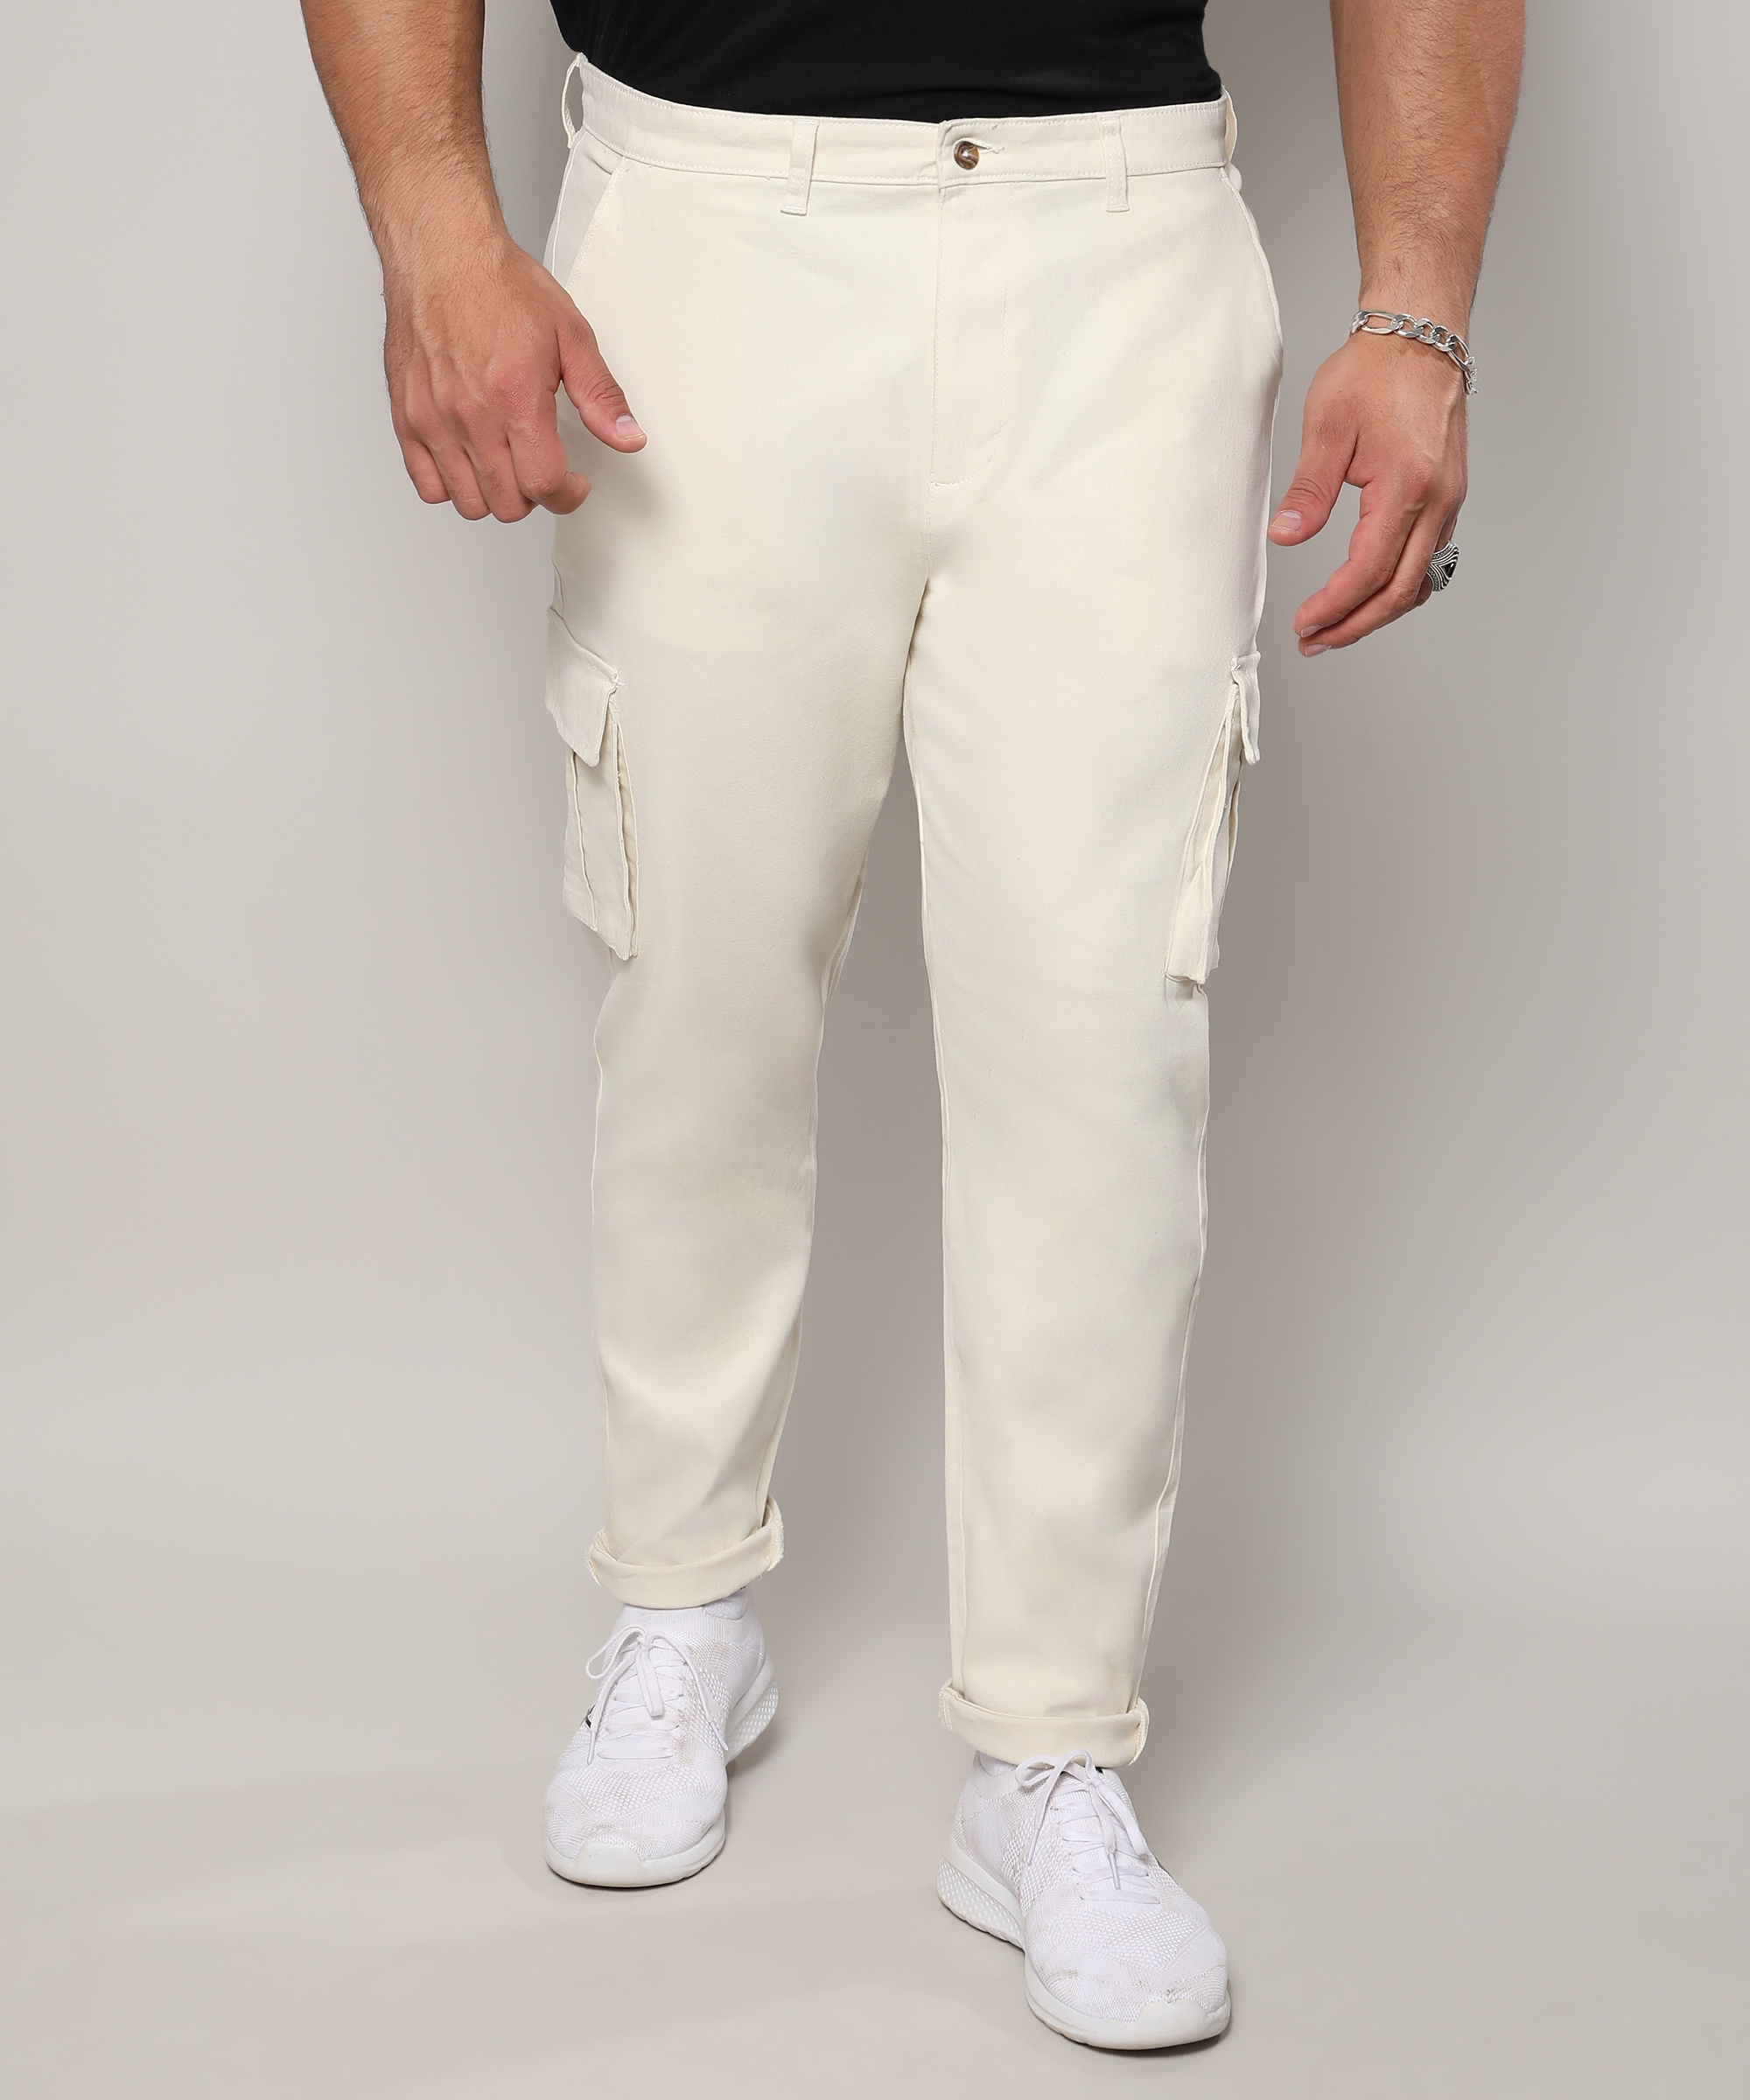 Men's Pale Yellow Cargo Trousers